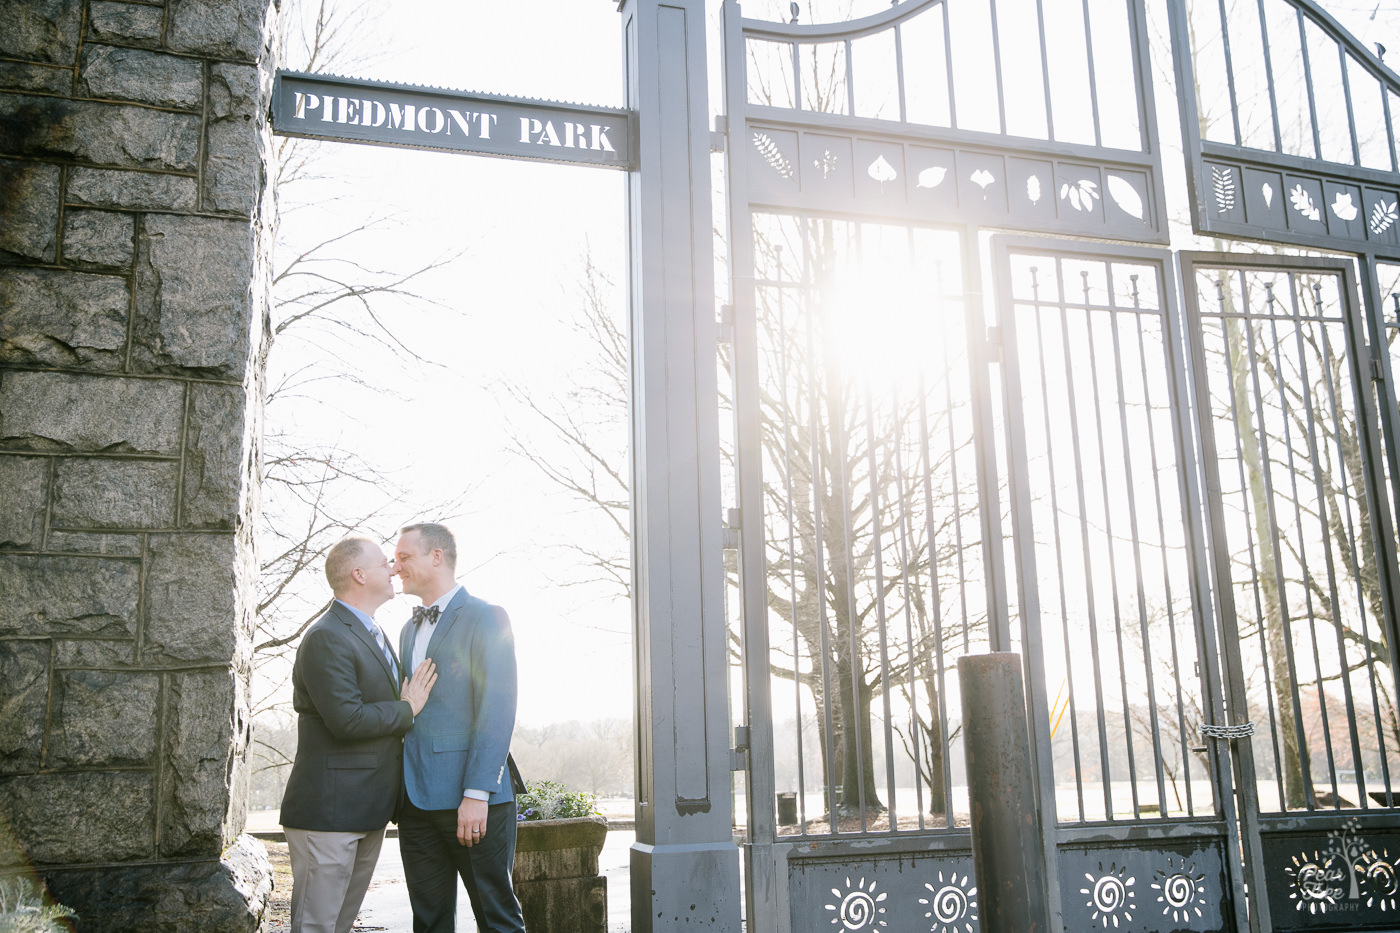 Two men in suits touching noses under Piedmont Park gate